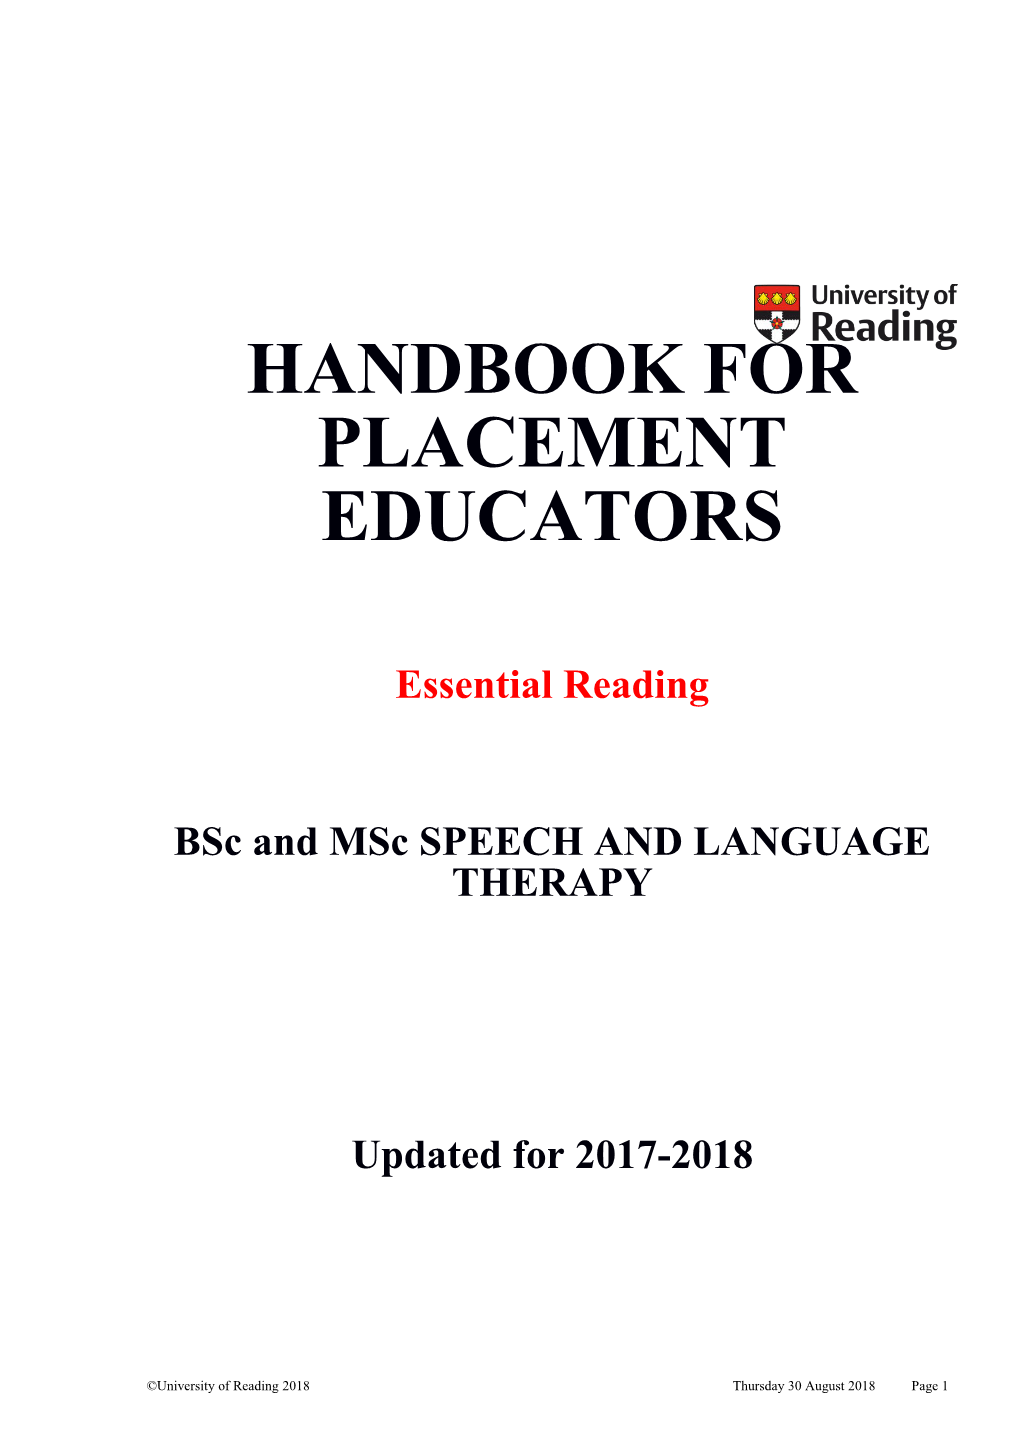 Bsc and Msc SPEECH and LANGUAGE THERAPY